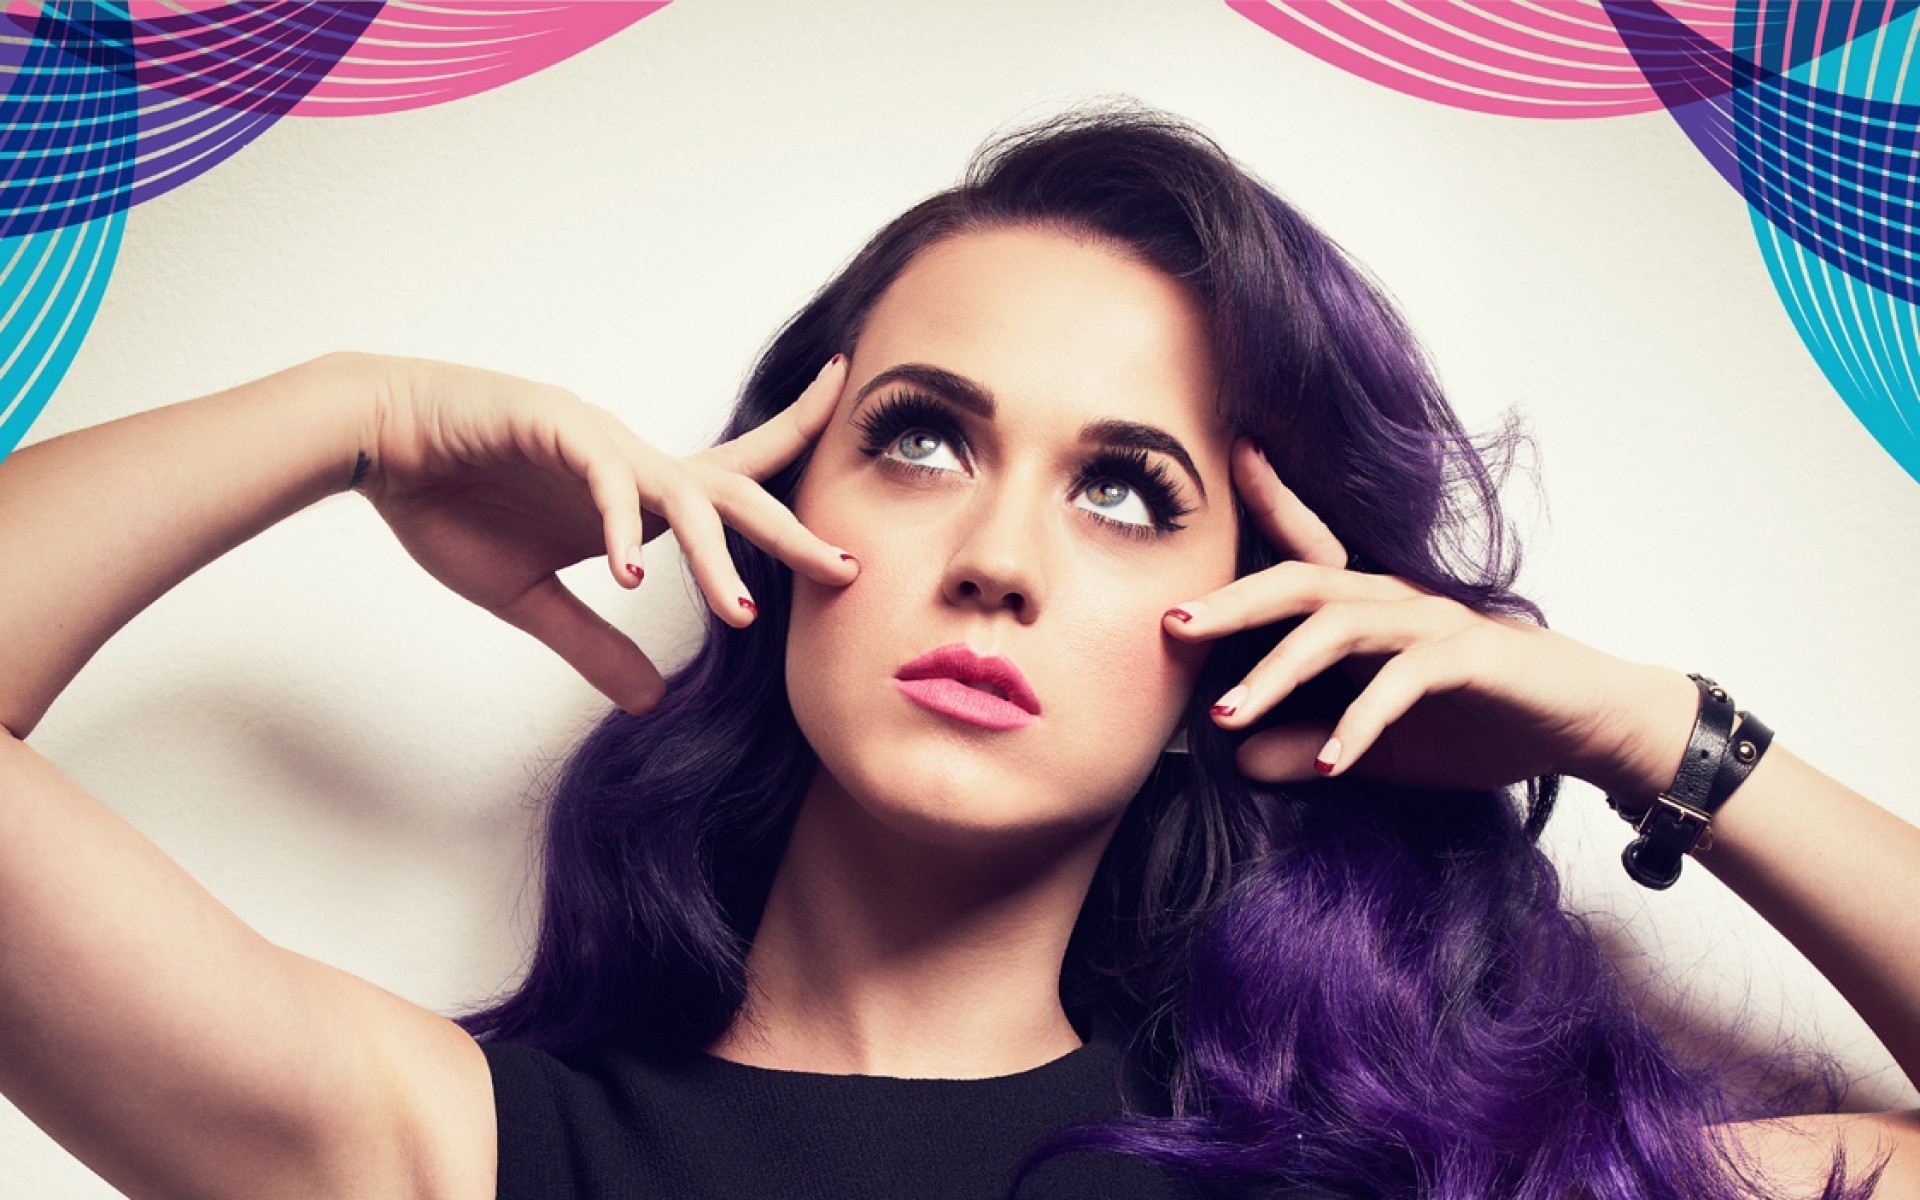 Katy Perry Wallpapers Download Free For Desktop | Best HD Wallpapers